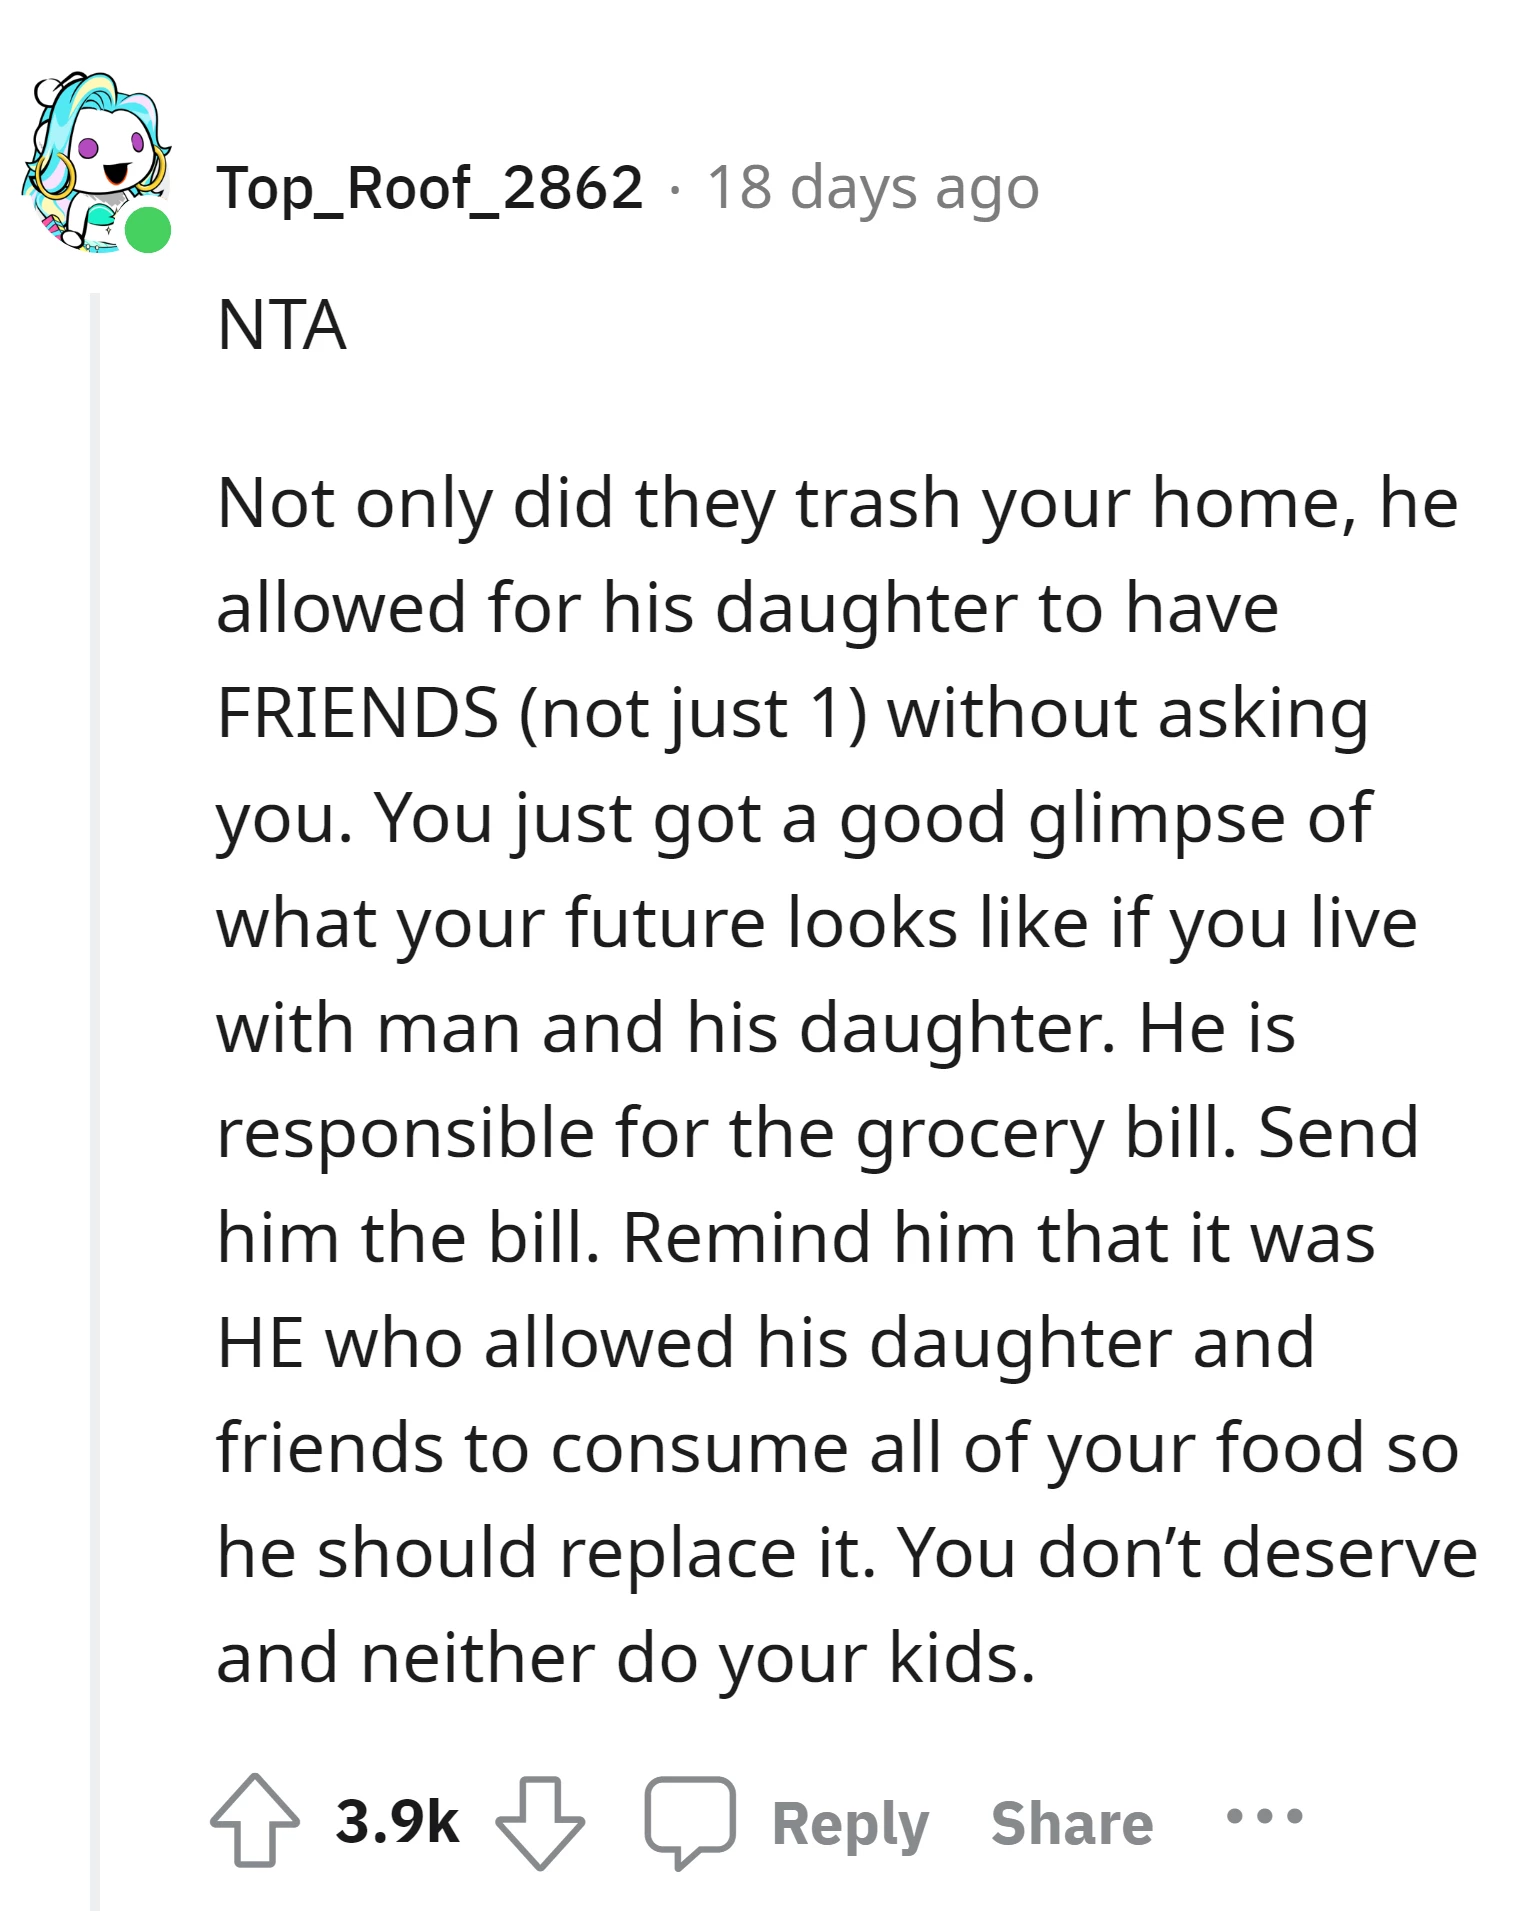 Jack should be responsible for the grocery bill